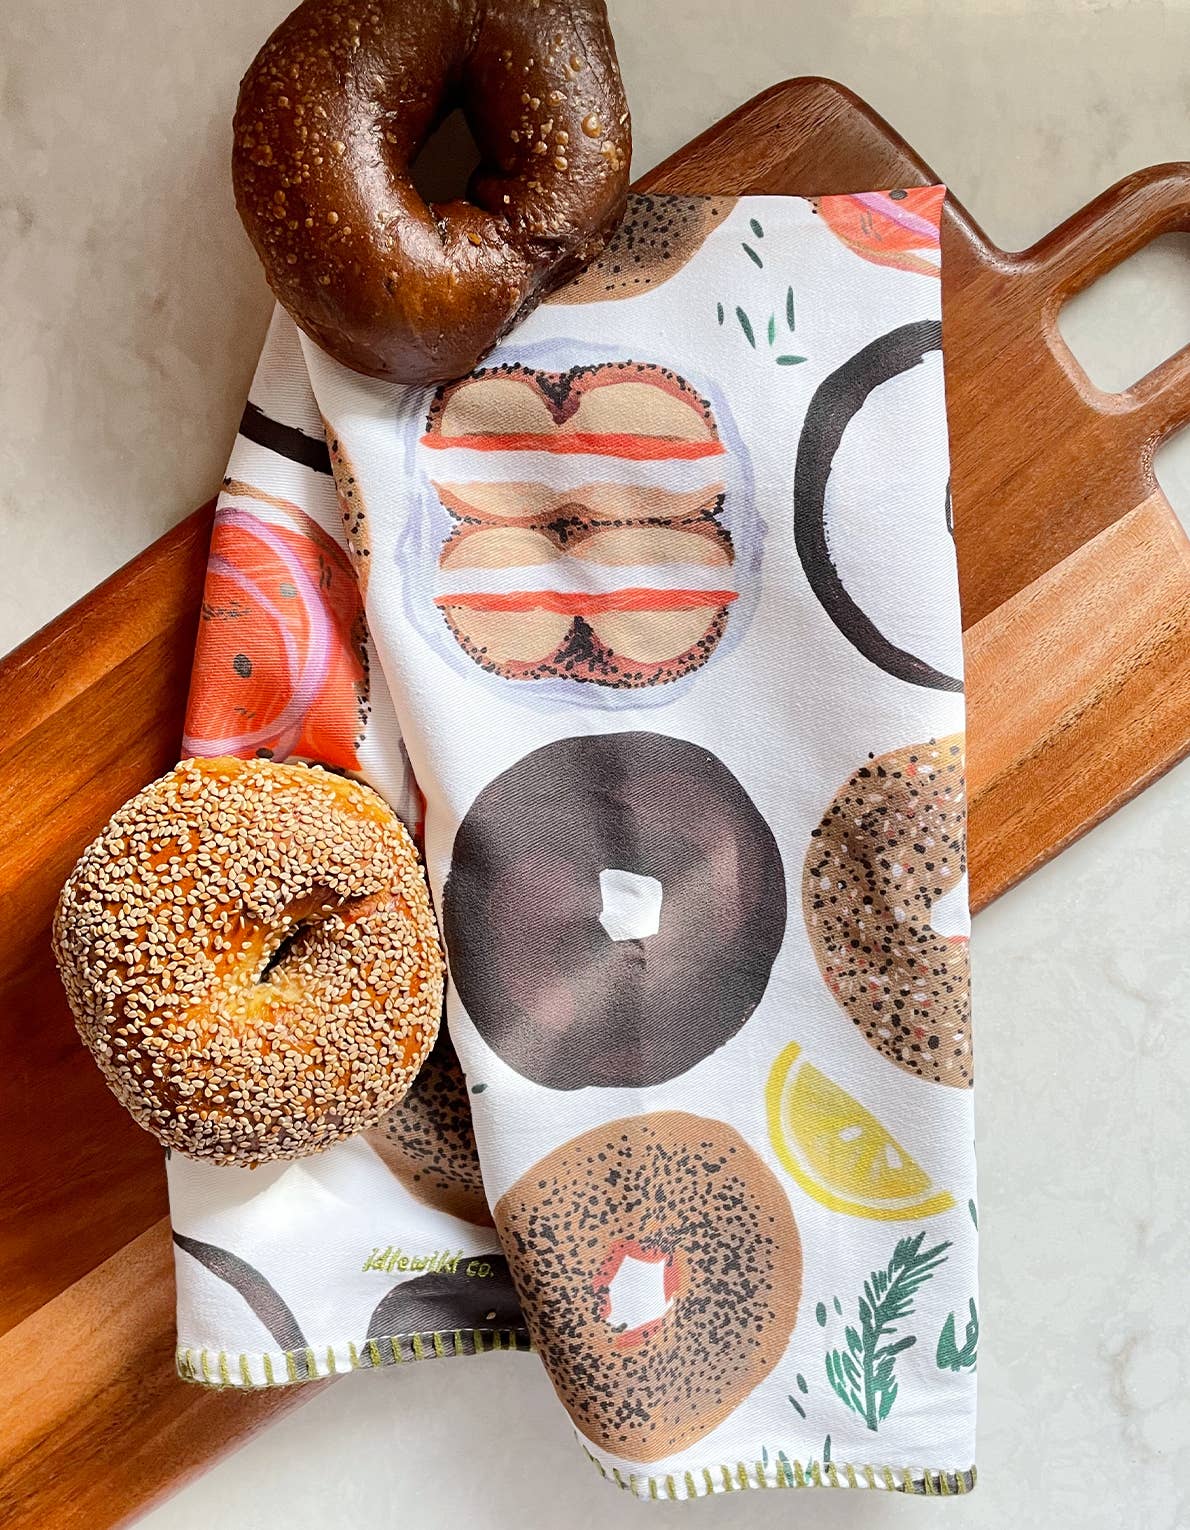 Tea towel with different types of bagels on it. It is laid out on a cutting board next to a sesame bagel and a pumpernickel bagel.  